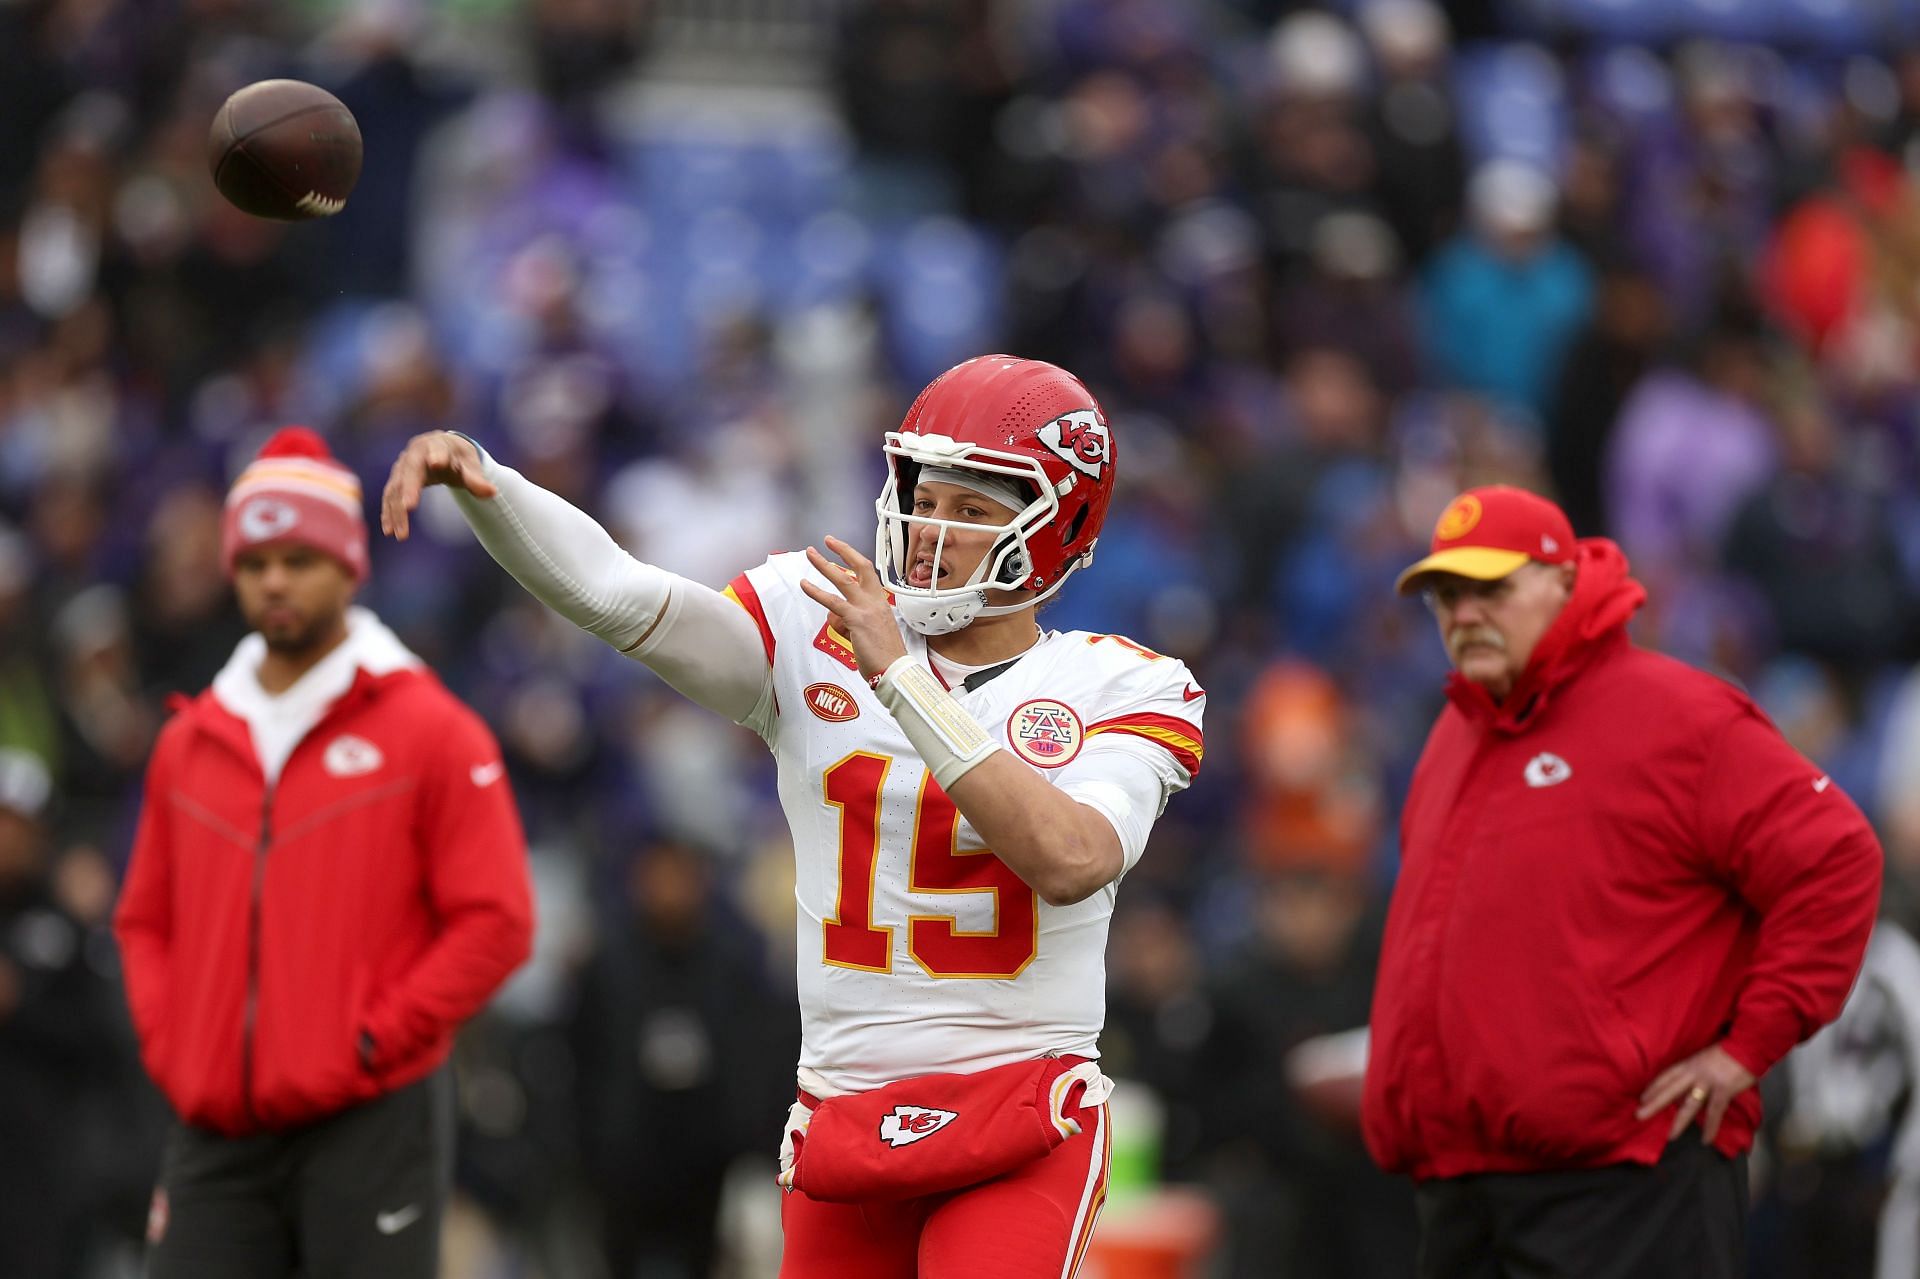 Patrick Mahomes is back in the Super Bowl